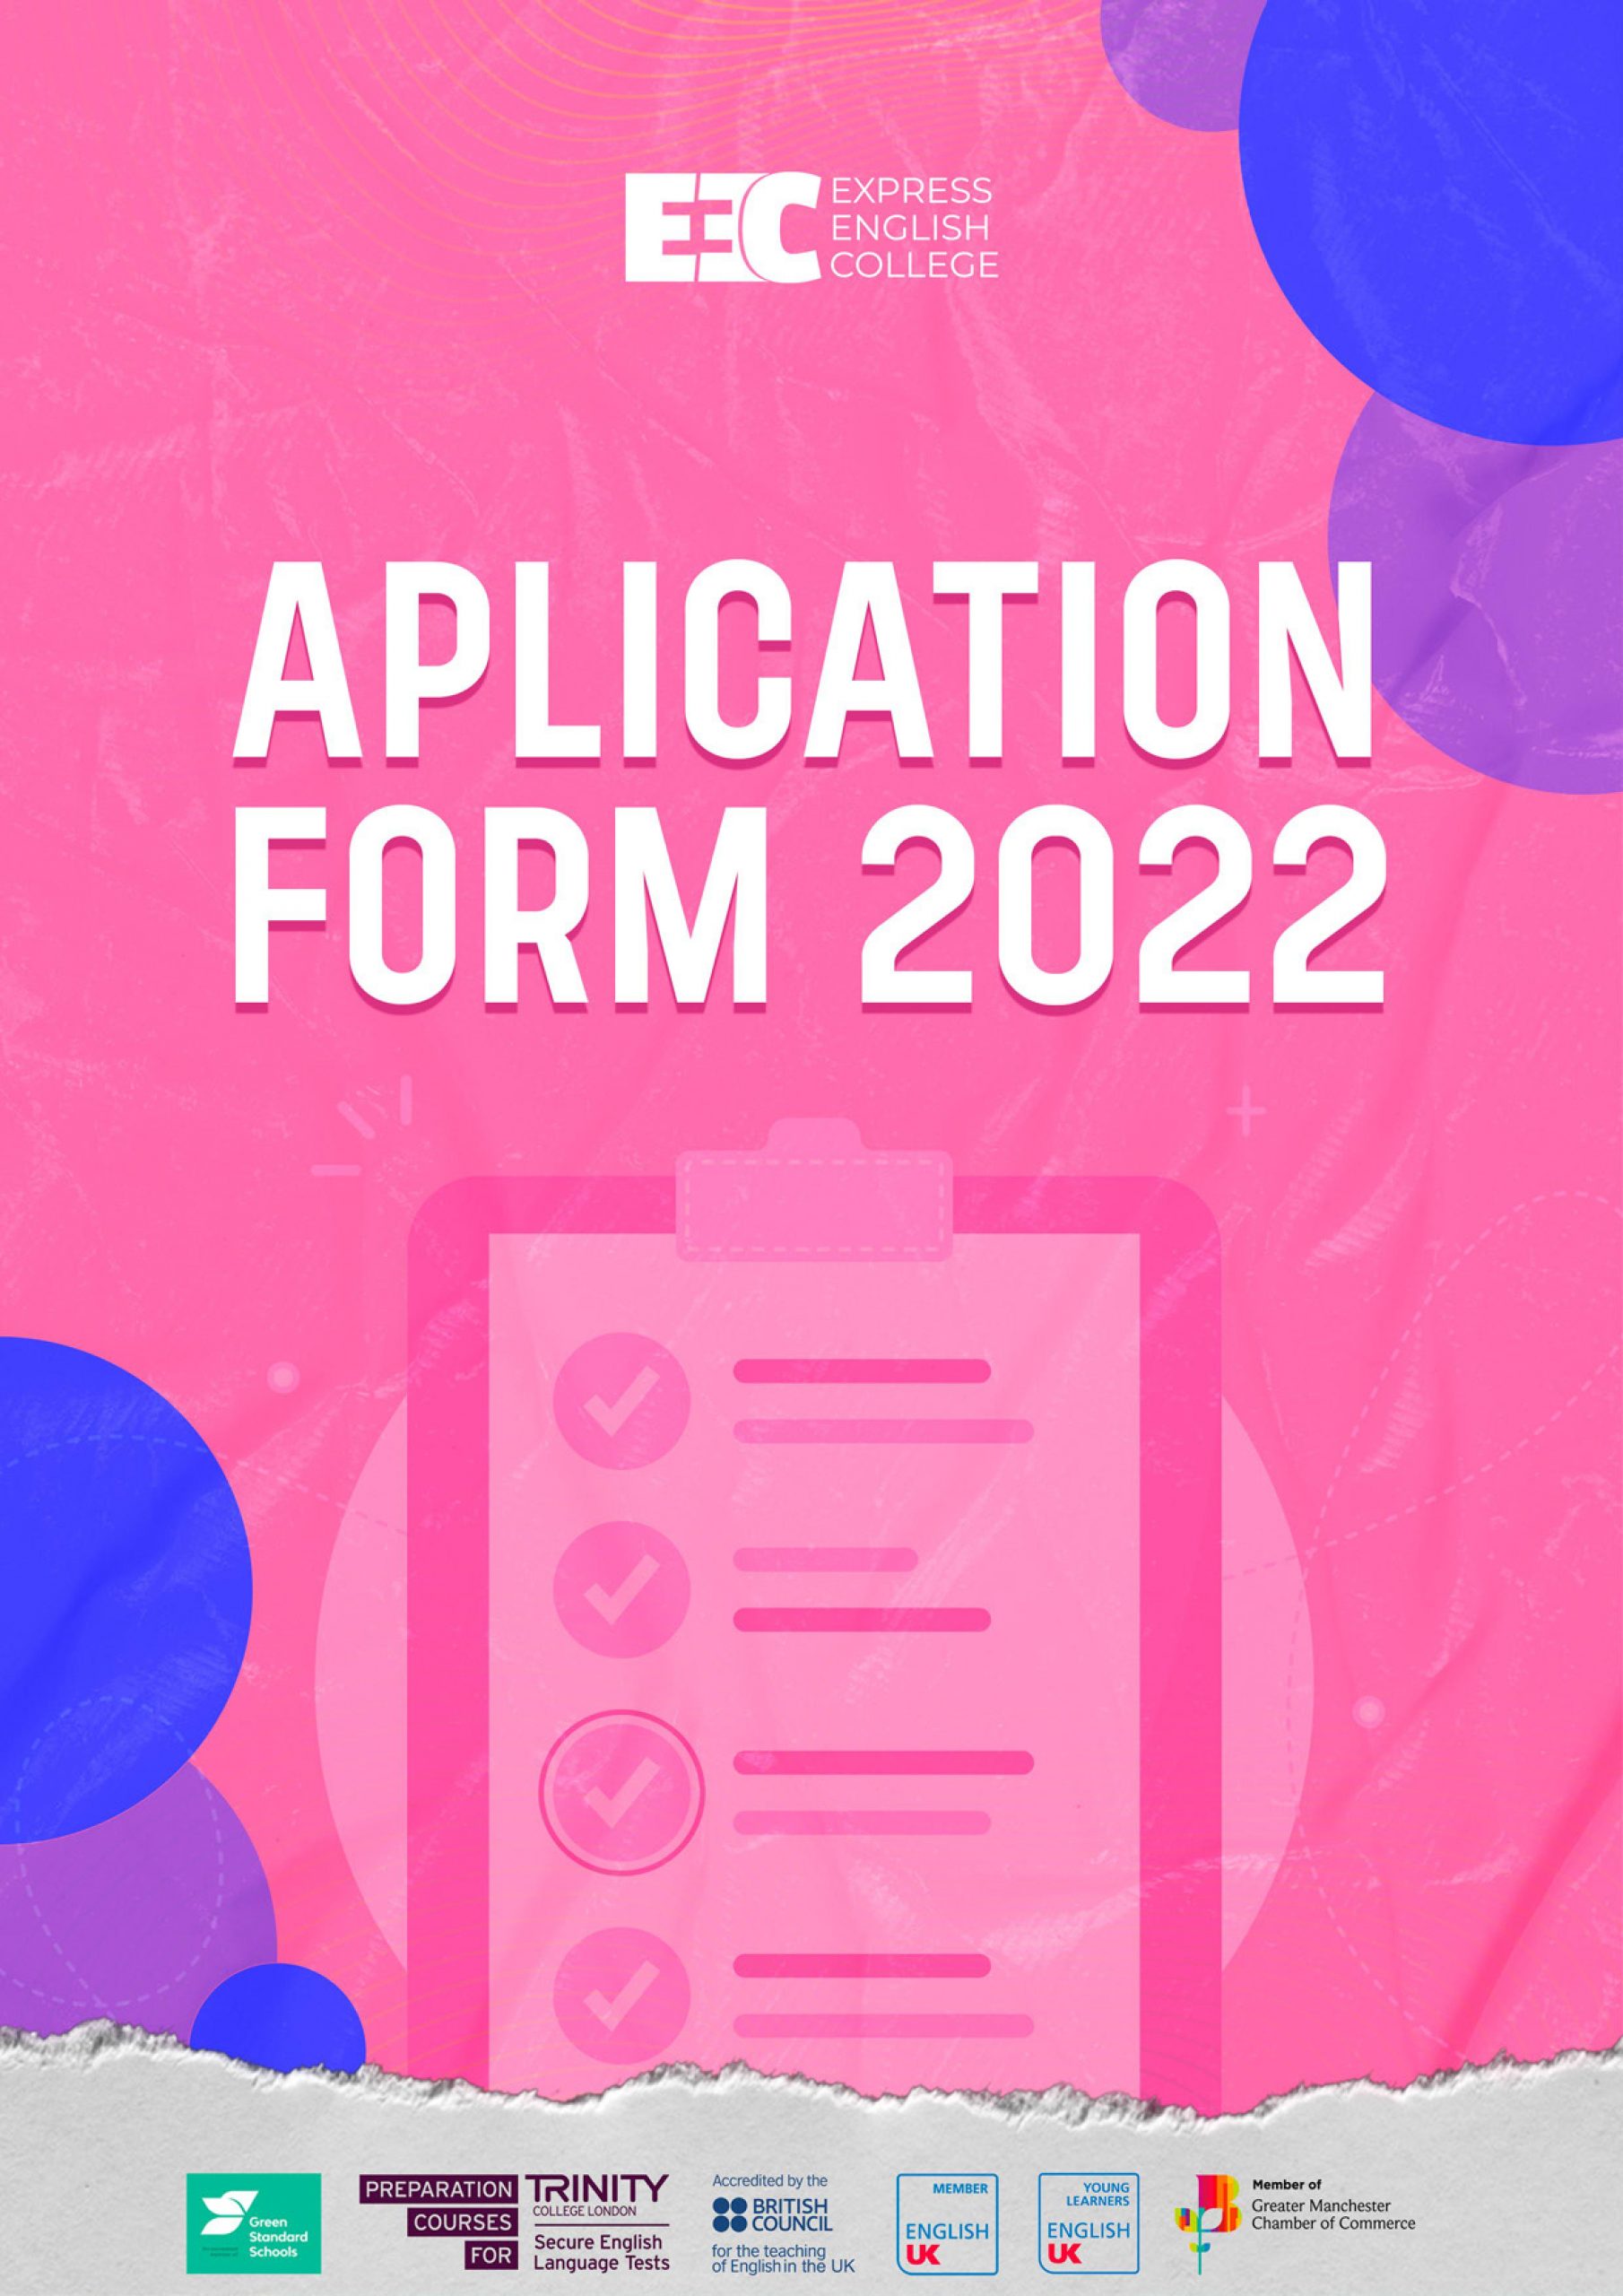 Student Application Form 2022